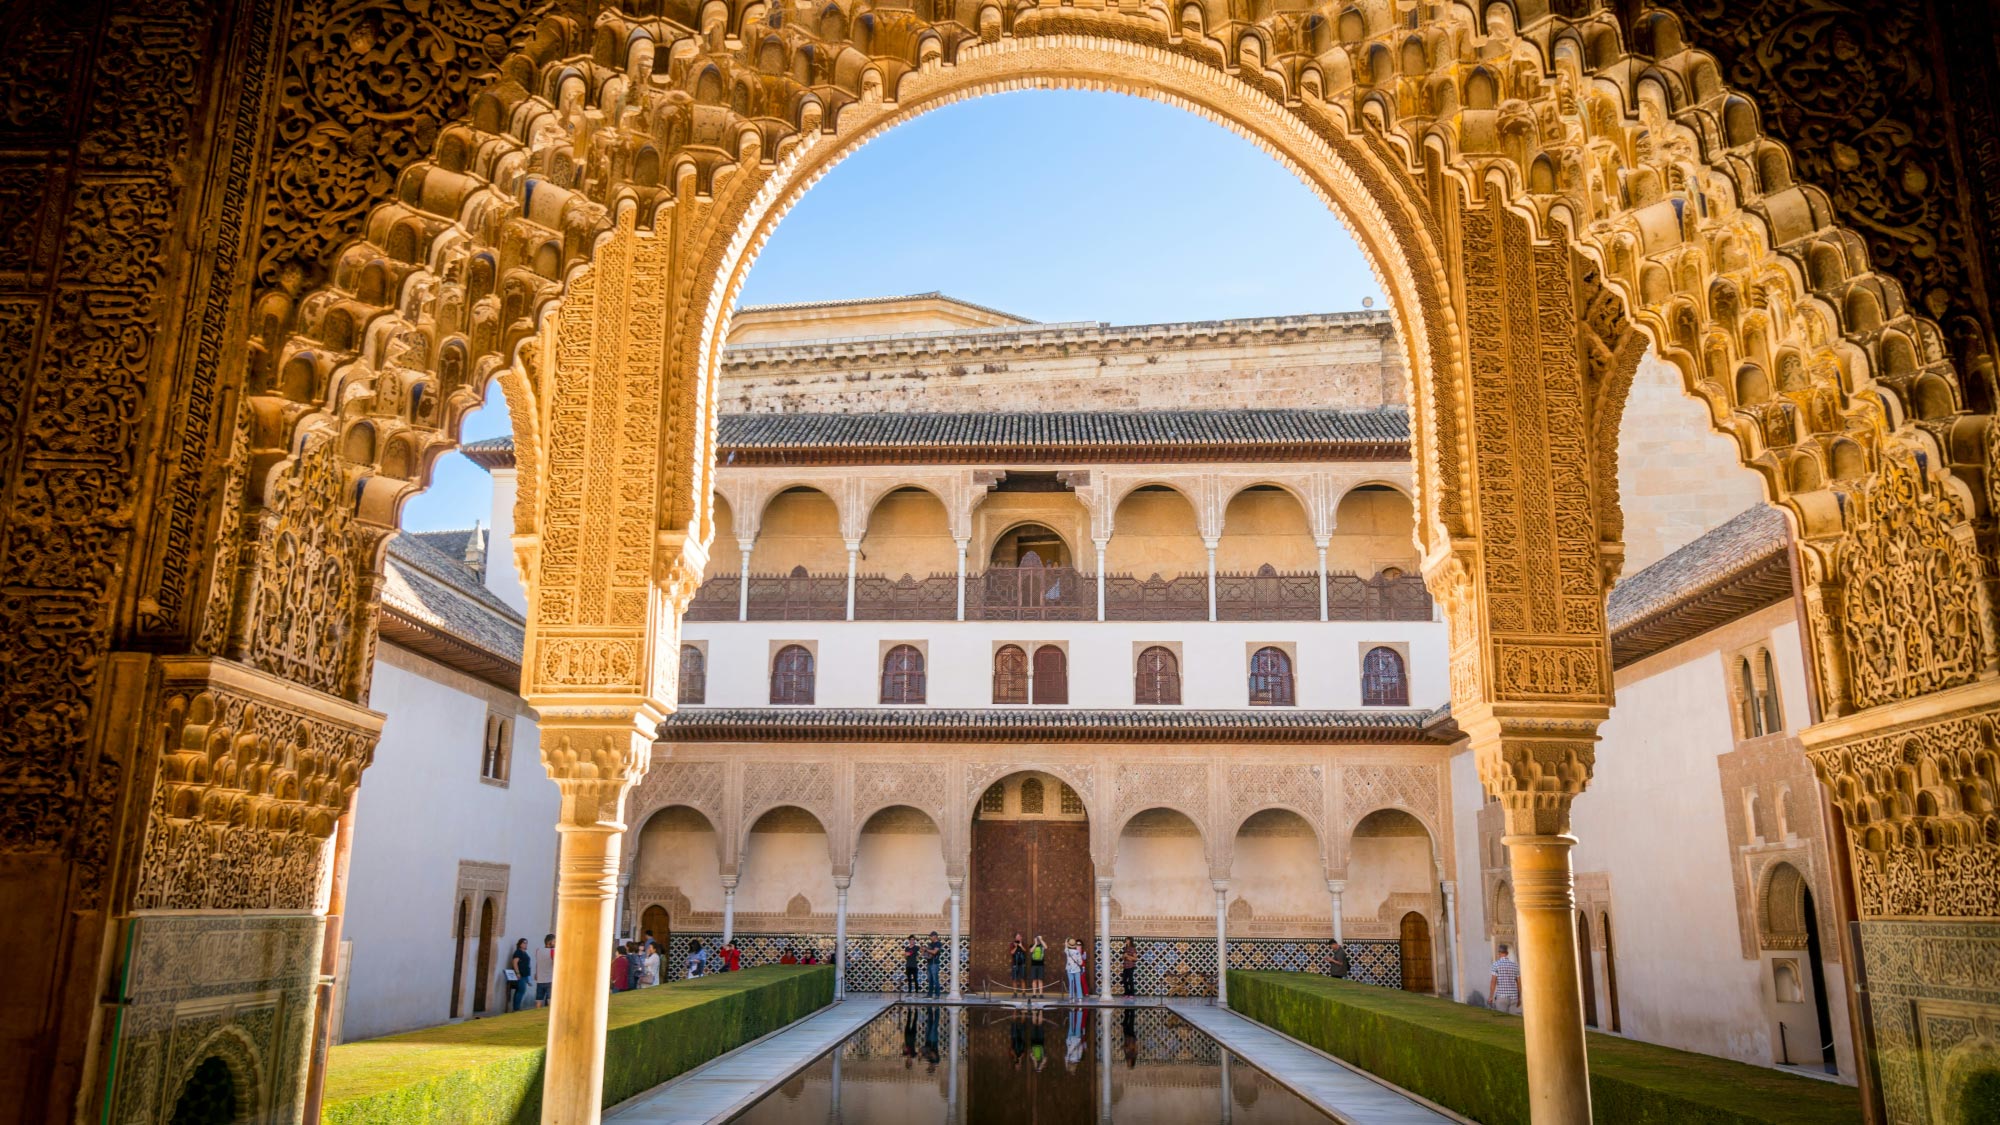 Explore Granada's timeless beauty from above as you soar over its historic skyline and iconic Alhambra Palace.